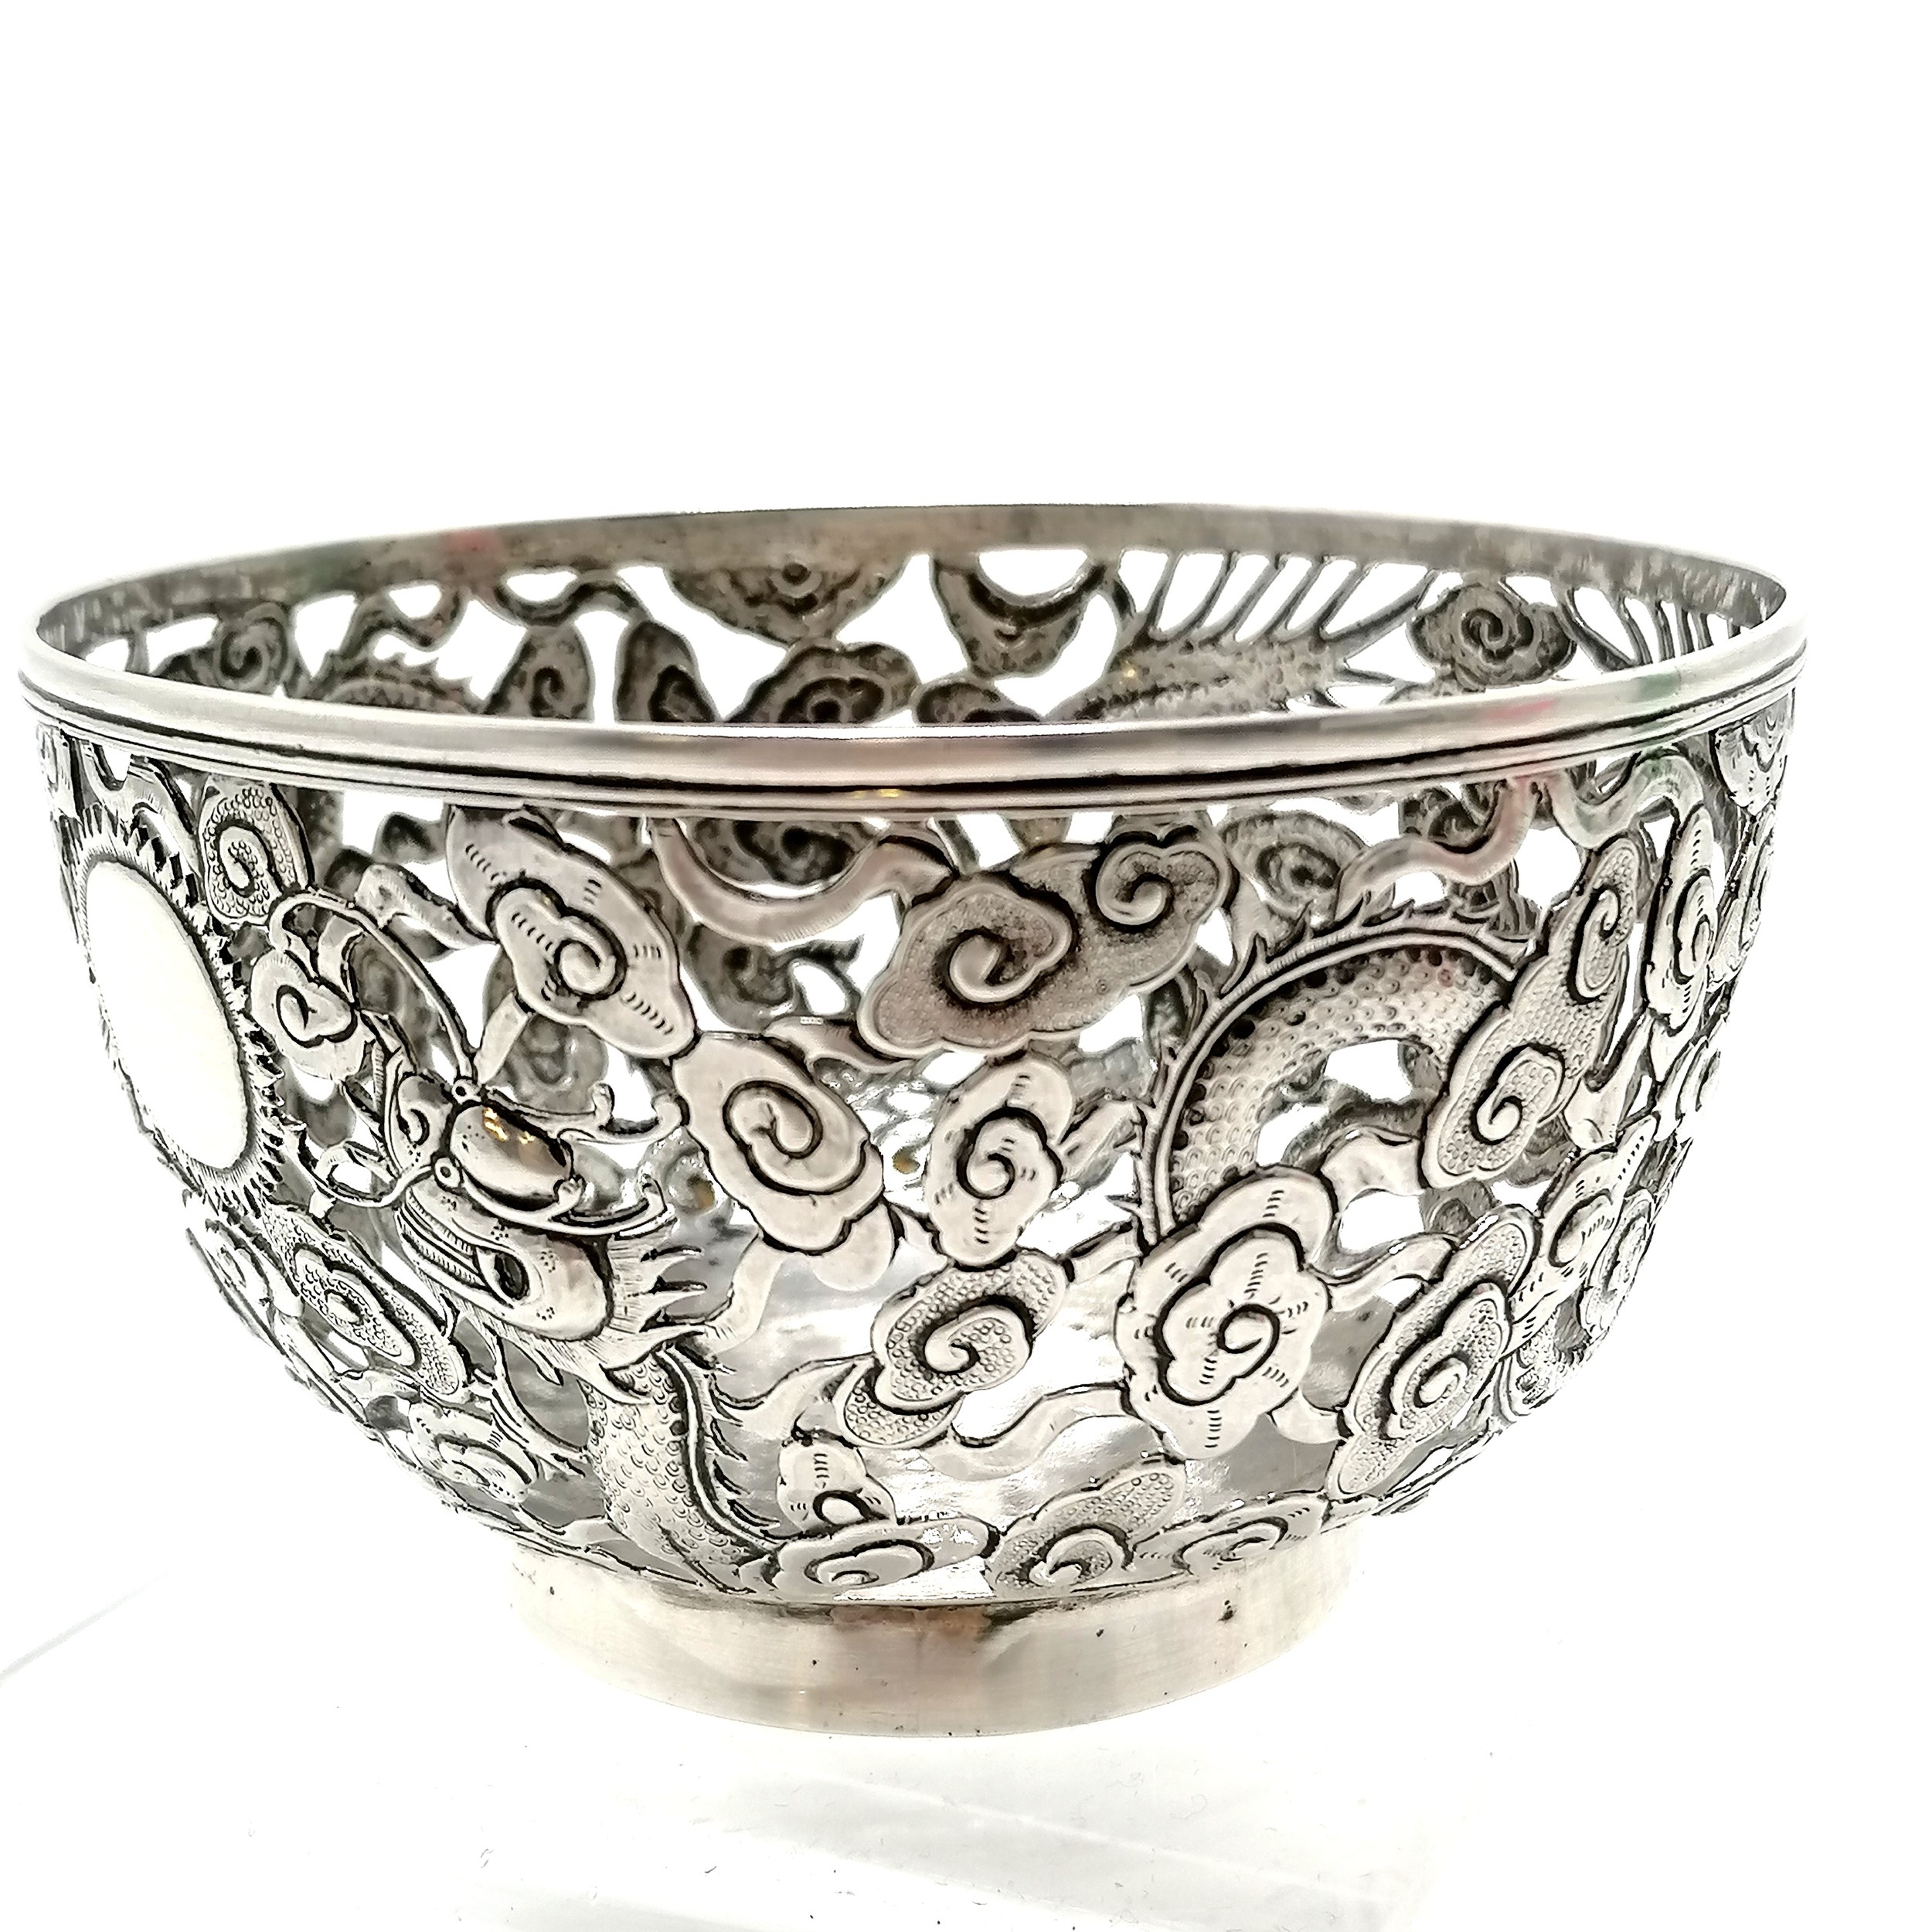 Chinese antique silver bowl with pierced decoration depicting 2 dragons & flaming pearl cartouche by - Image 6 of 6